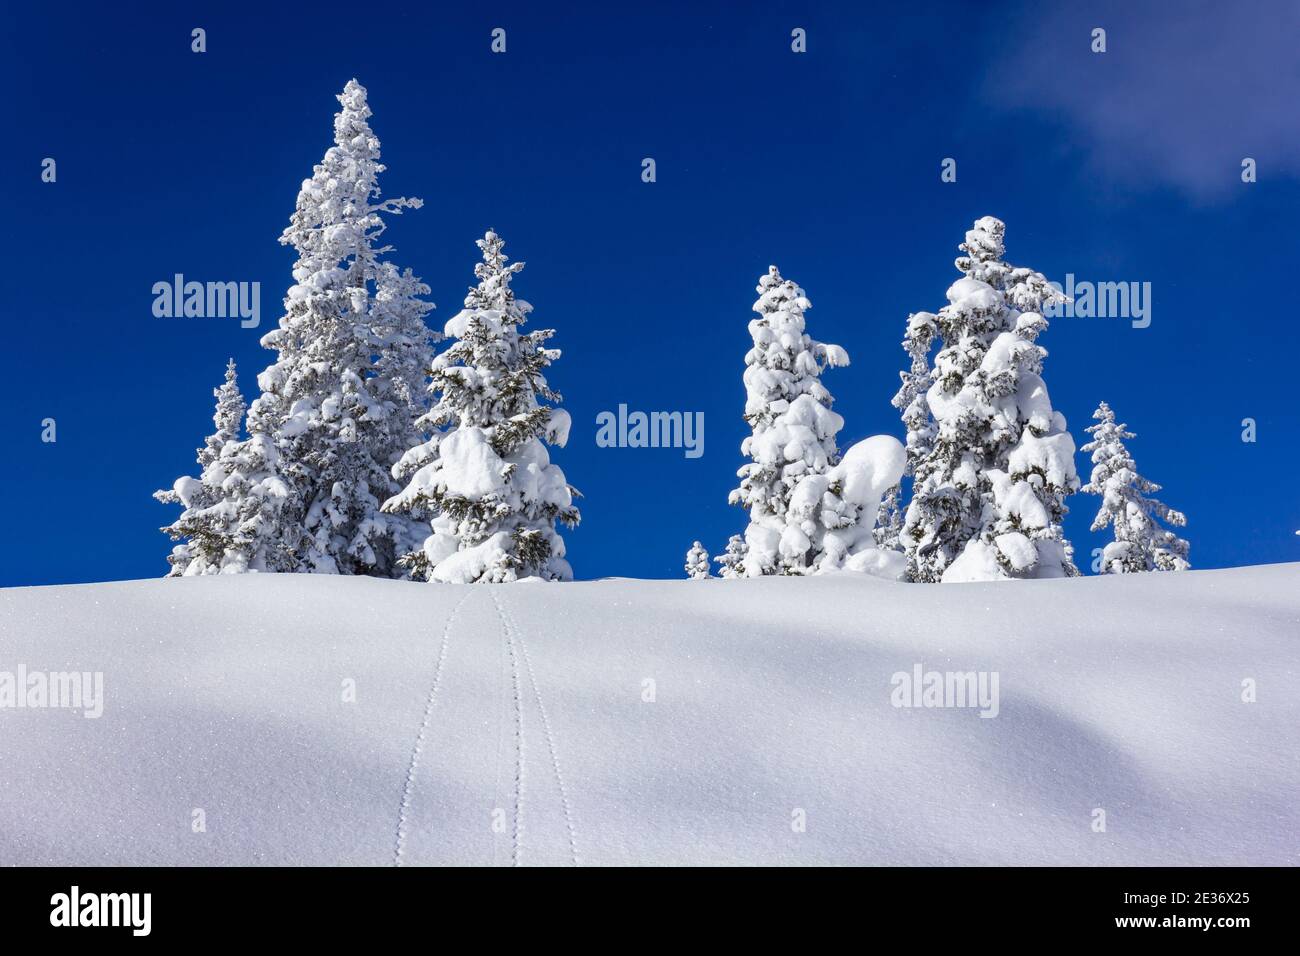 Several spruce trees covered in fresh snow during wintertime in the alps Stock Photo